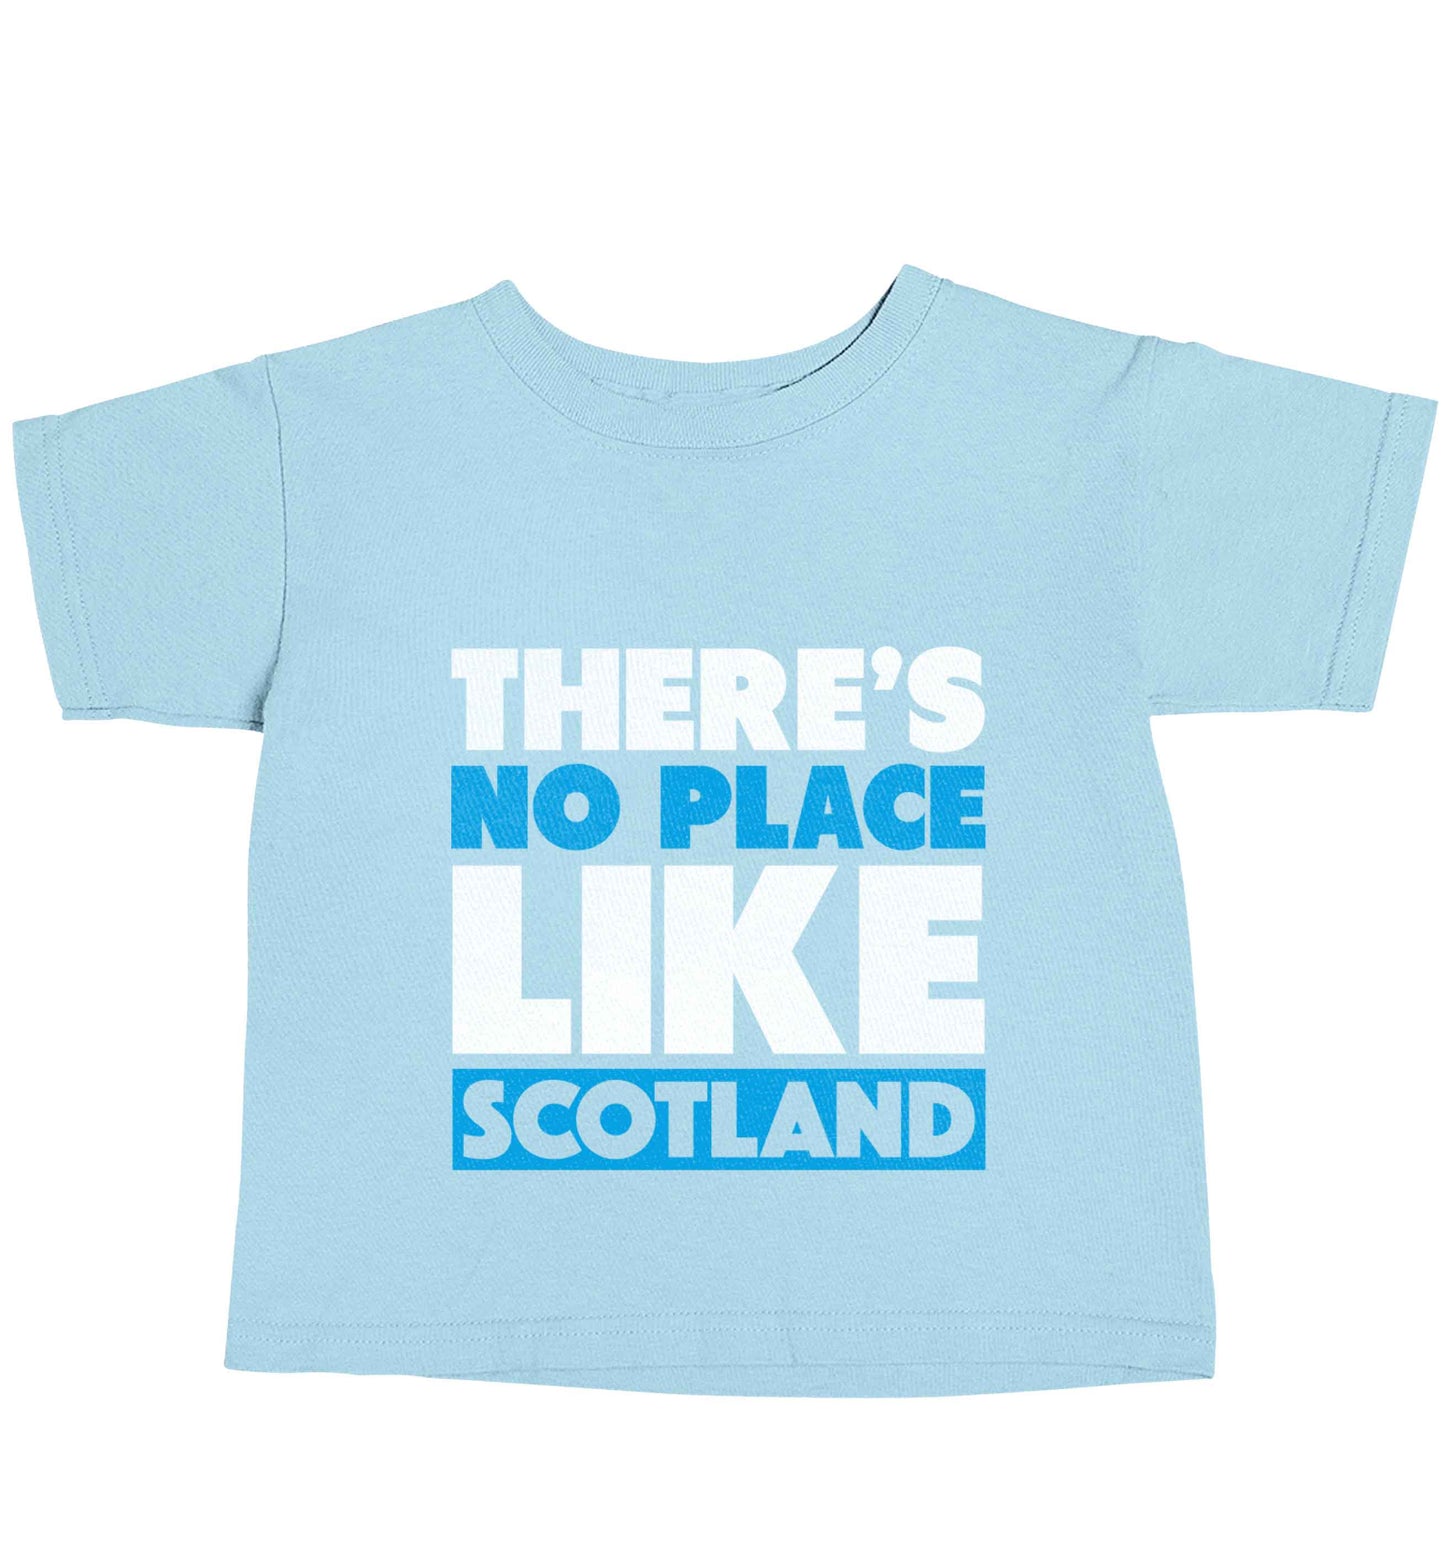 There's no place like Scotland light blue baby toddler Tshirt 2 Years